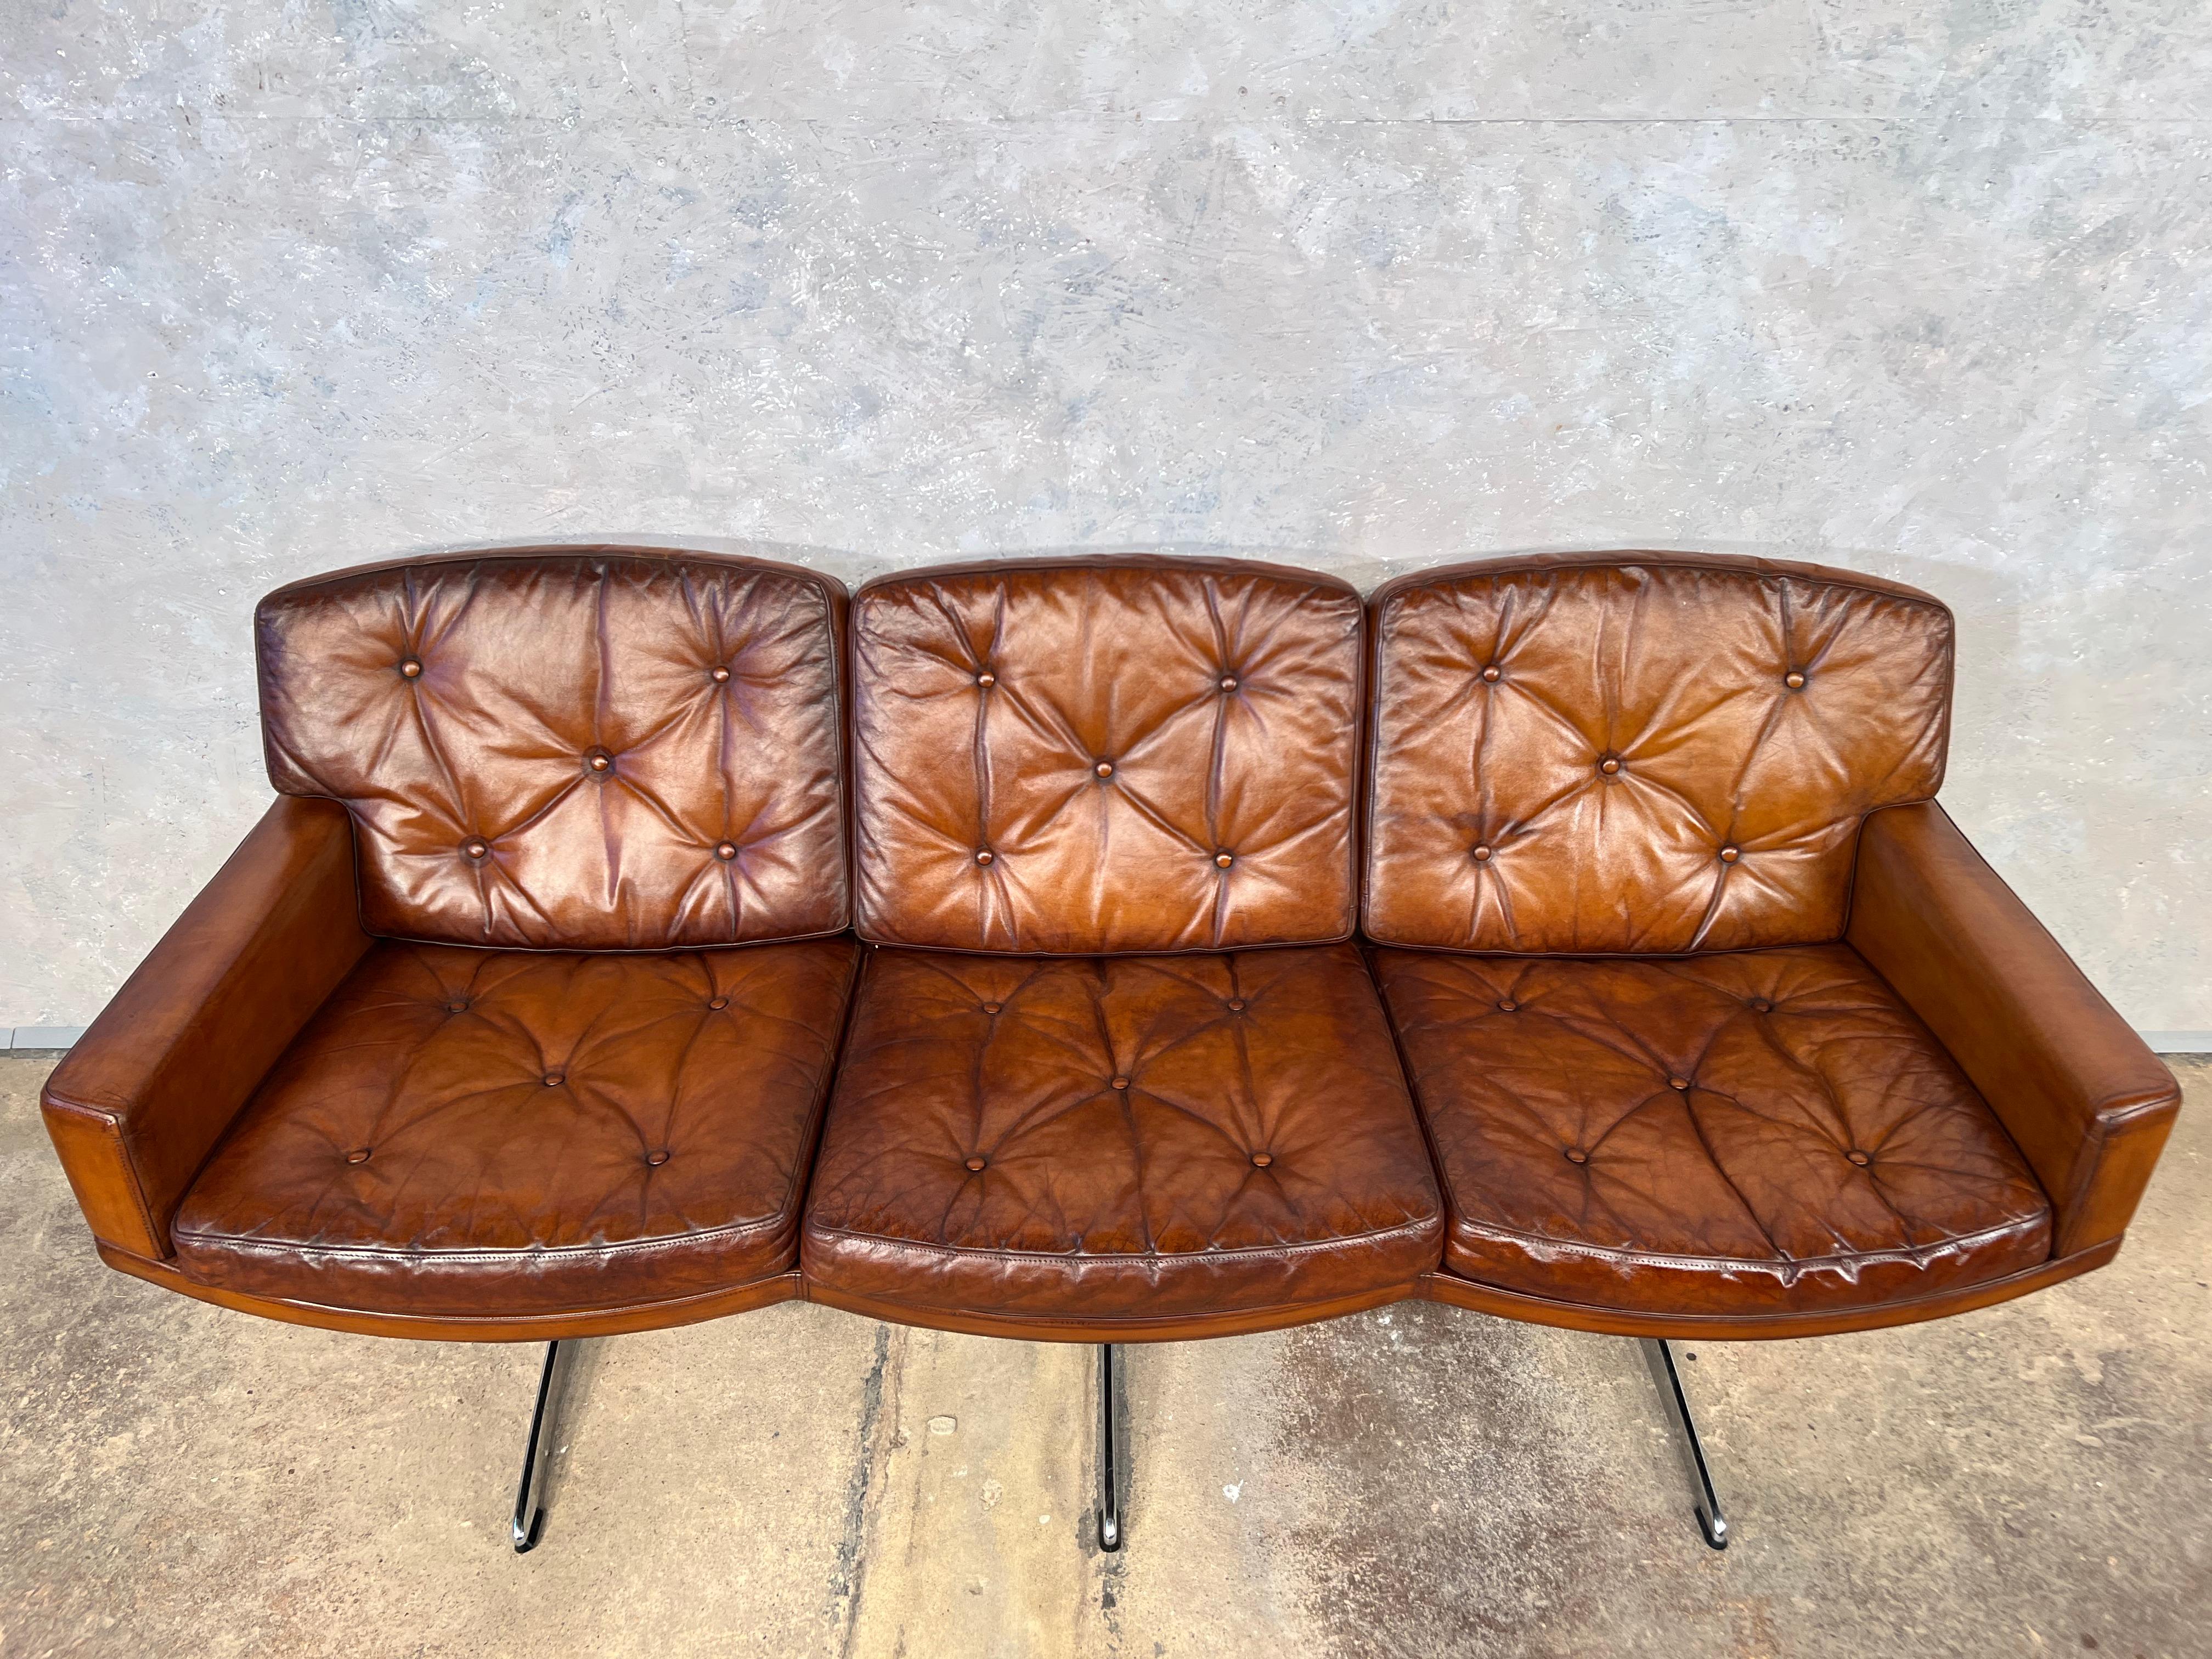 Very Stylish leather sofa designed by Frederik Kayser for Vatne Møbler 1960 Norway.

An exceptional Sofa, Great design, sits beautifully and is very stylish. A great quality sofa and has a beautiful hand dyed patinated tan colour and great finish.